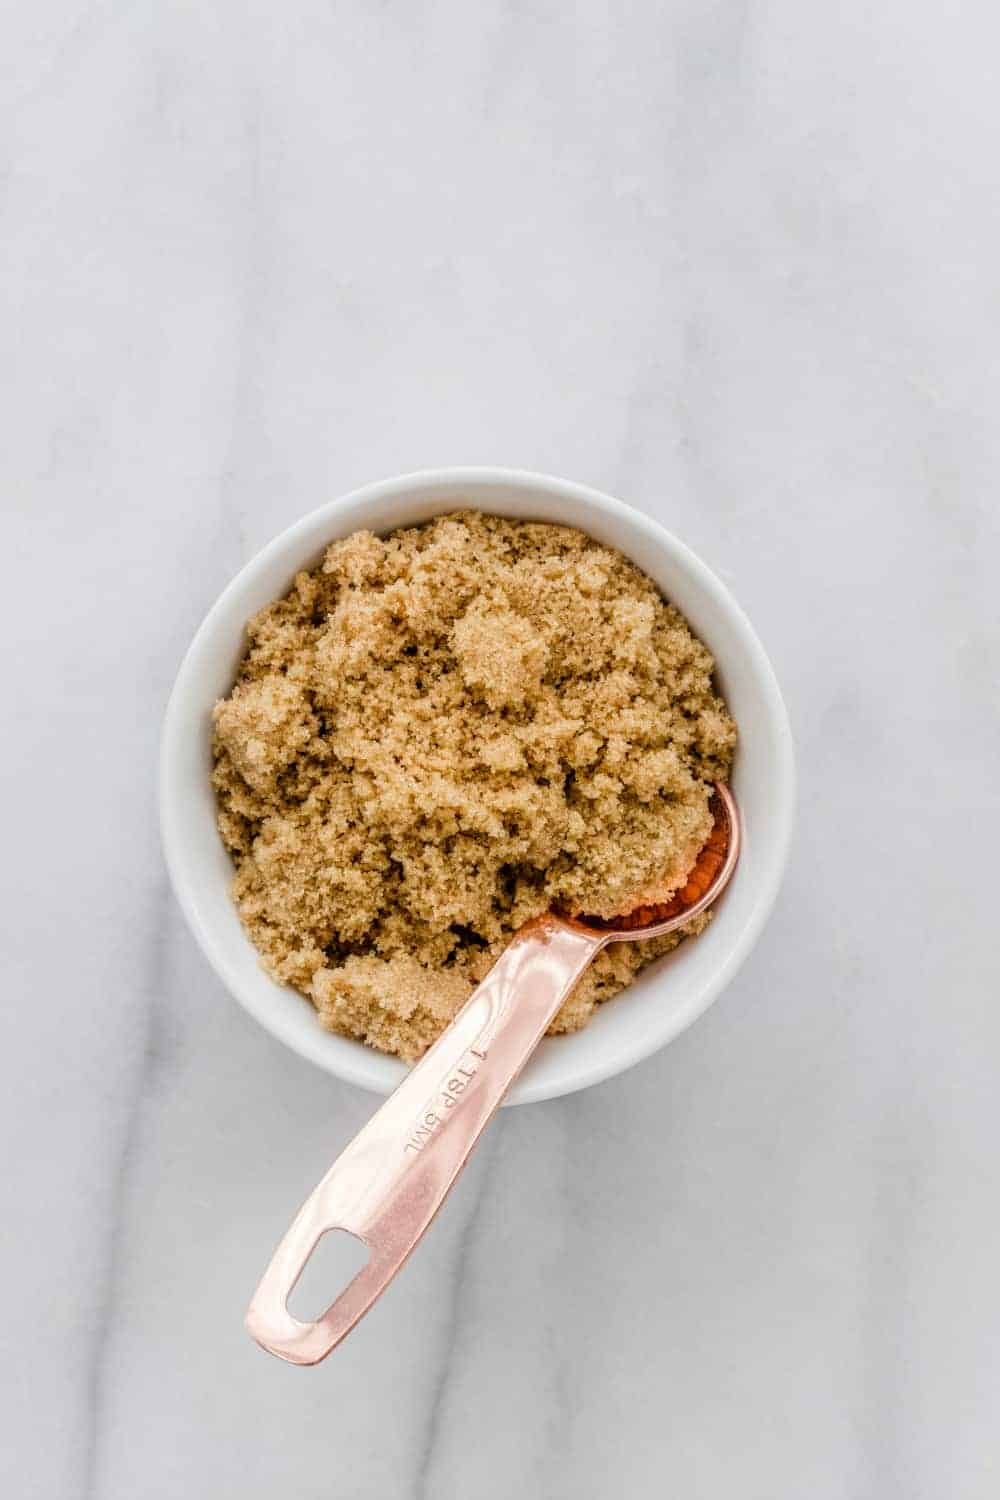 Sugar is one of the most important baking ingredients we use. Learn the difference between types of sugar, including brown sugar.